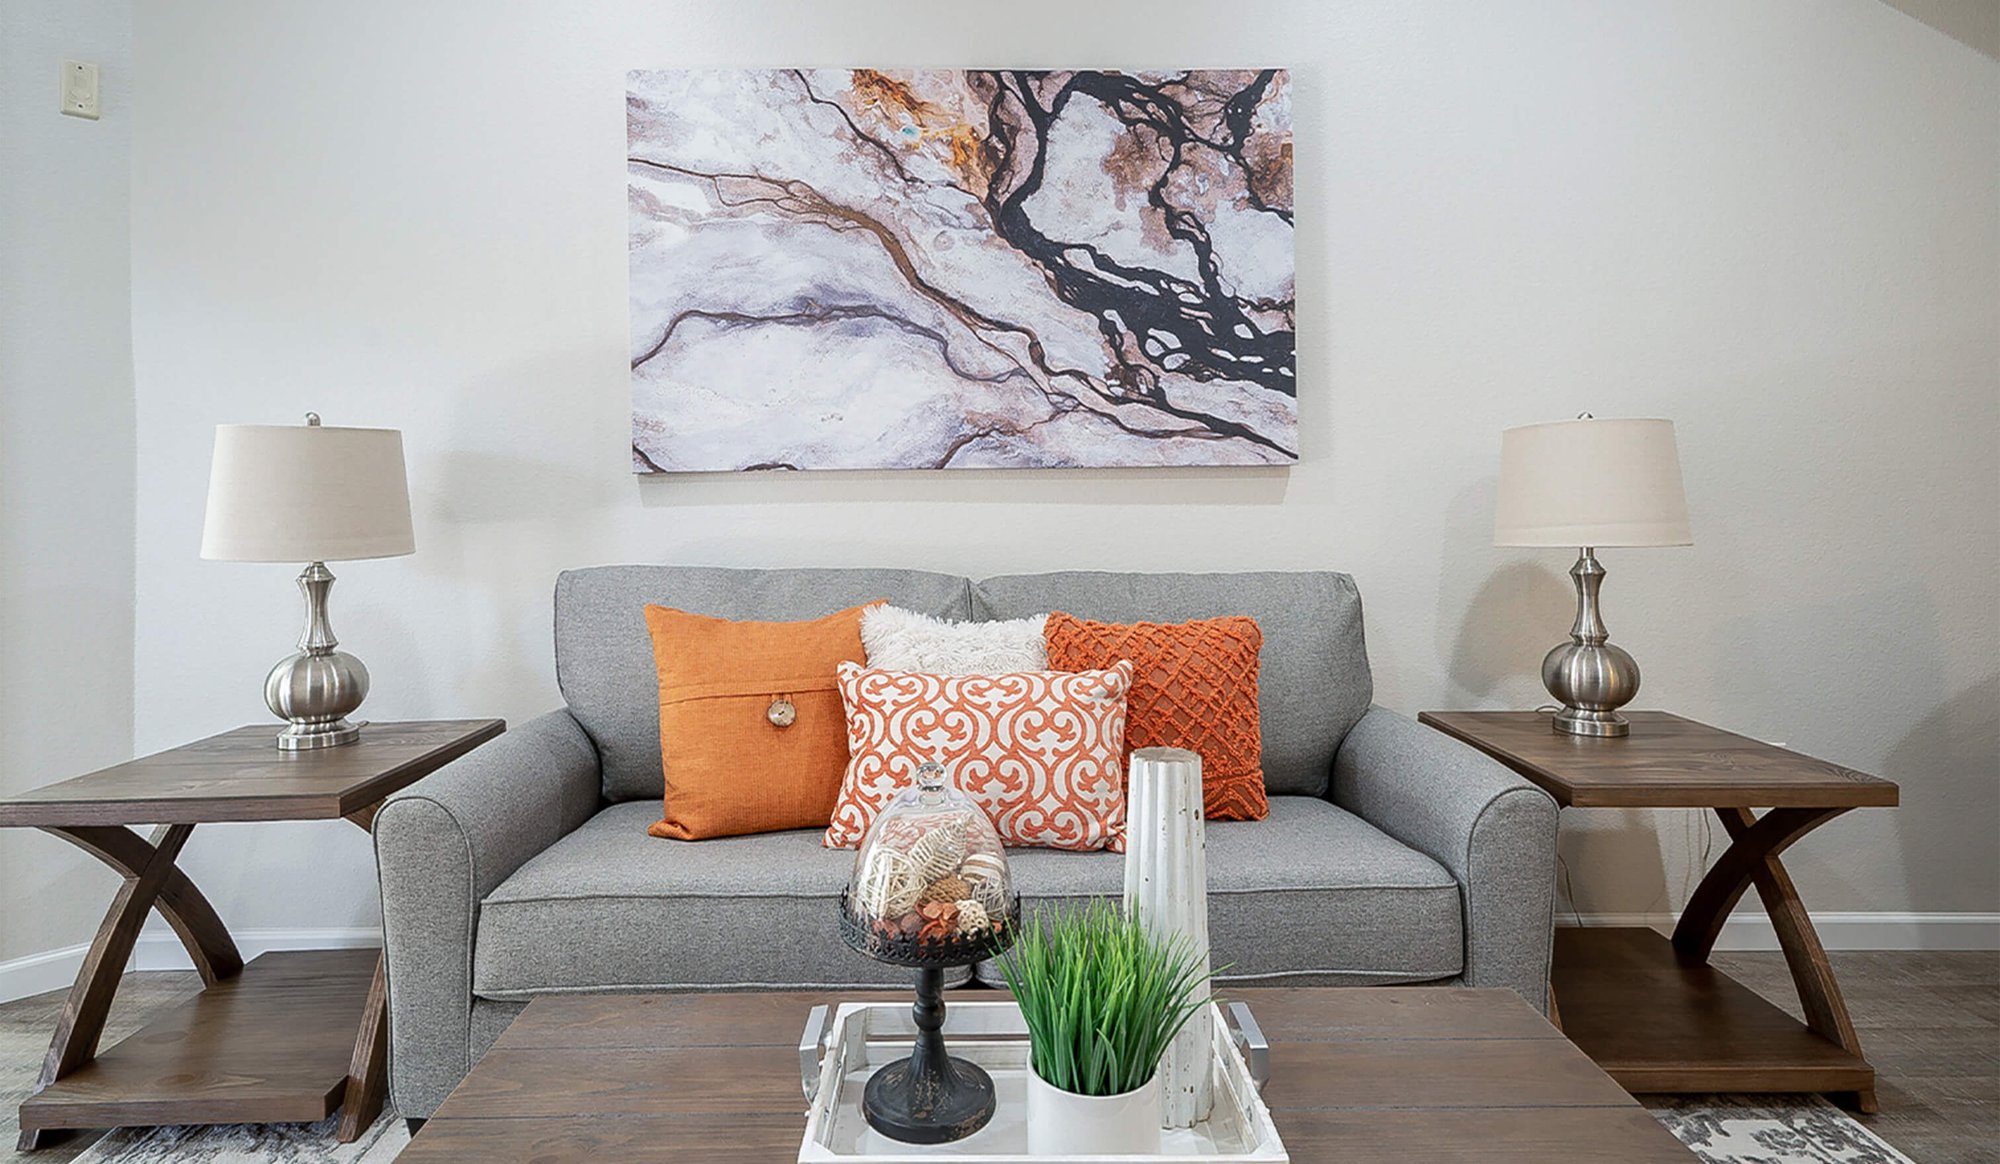 Living room furniture with orange accents